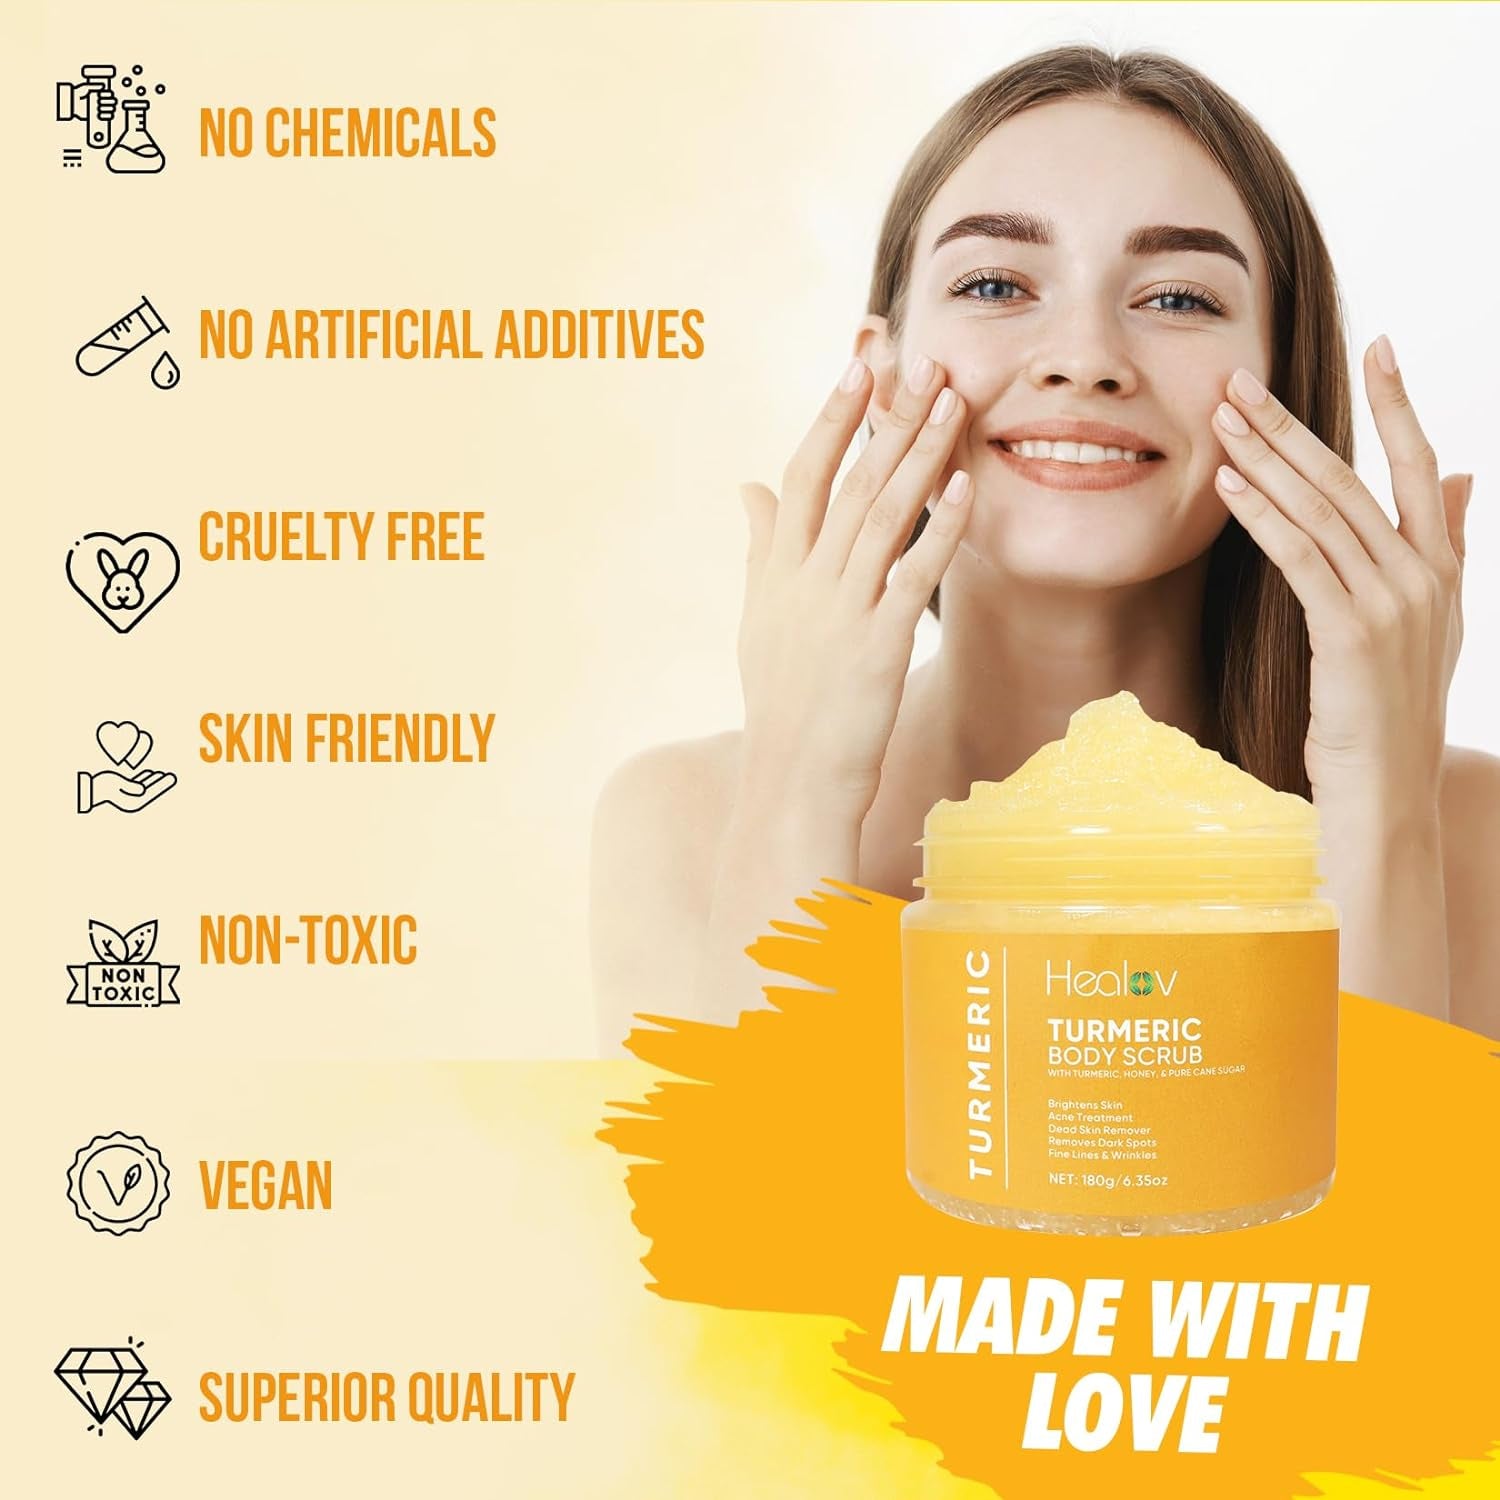 Turmeric Body Scrub - Skin Brightening Face & Body Scrub with Turmeric - All-Natural Exfoliating Turmeric Body Scrub for Hyperpigmentation - Turmeric Scrub Boosts Circulation & Removes Toxins